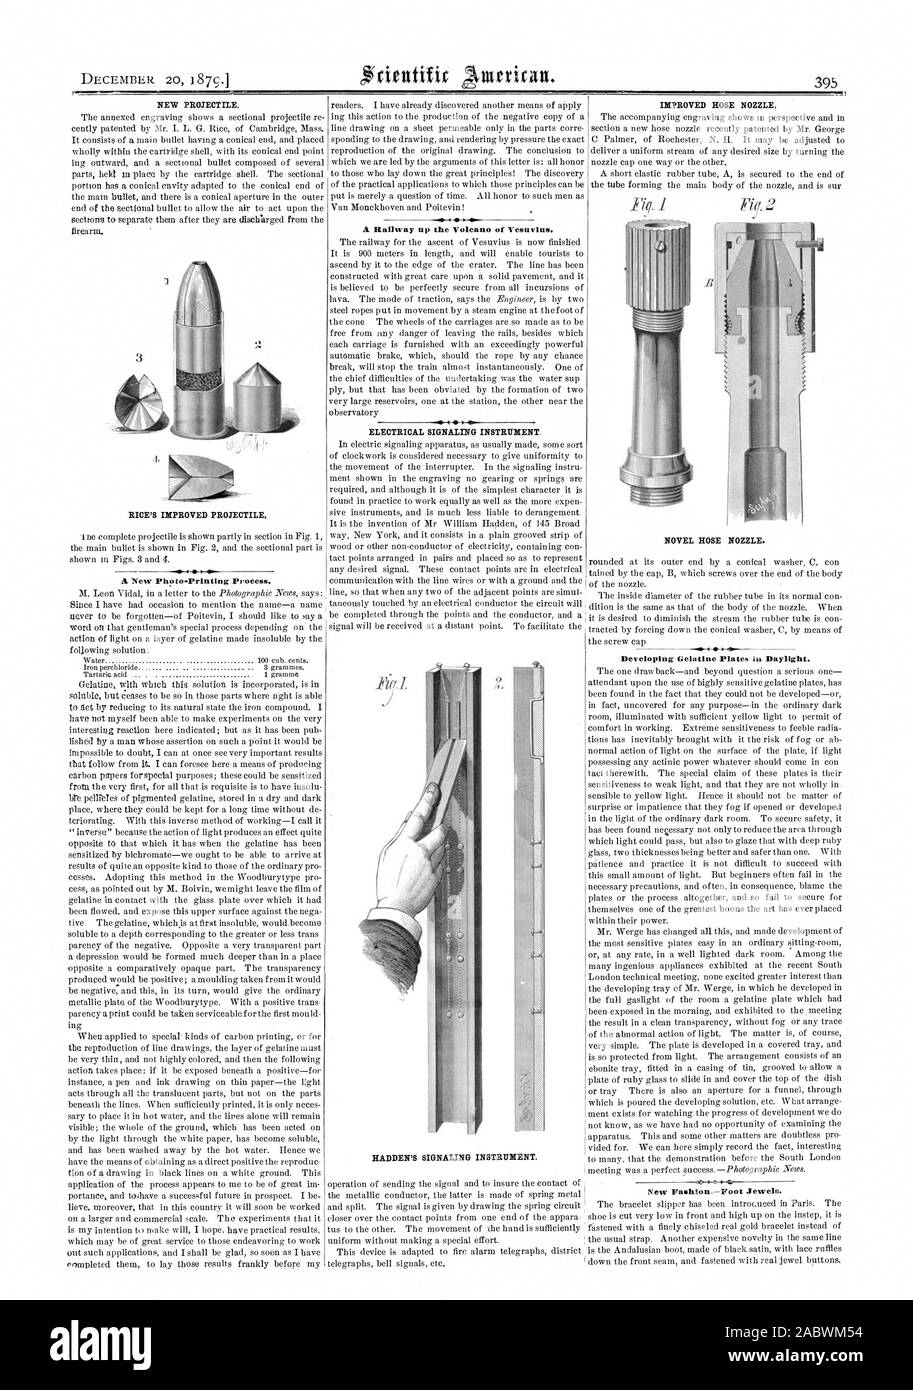 A Railway up the Volcano of Vesuvius. I ELECTRICAL SIGNALING INSTRUMENT. MADDEN'S SIGNALING INSTRUMENT. NEW PROJECTILE. RICE'S IMPROVED PROJECTILE. 41. IMPROVED HOSE NOZZLE. Developing Gelatine Plates in Daylight. NOVEL HOSE NOZZLE., scientific american, 1879-12-20 Stock Photo